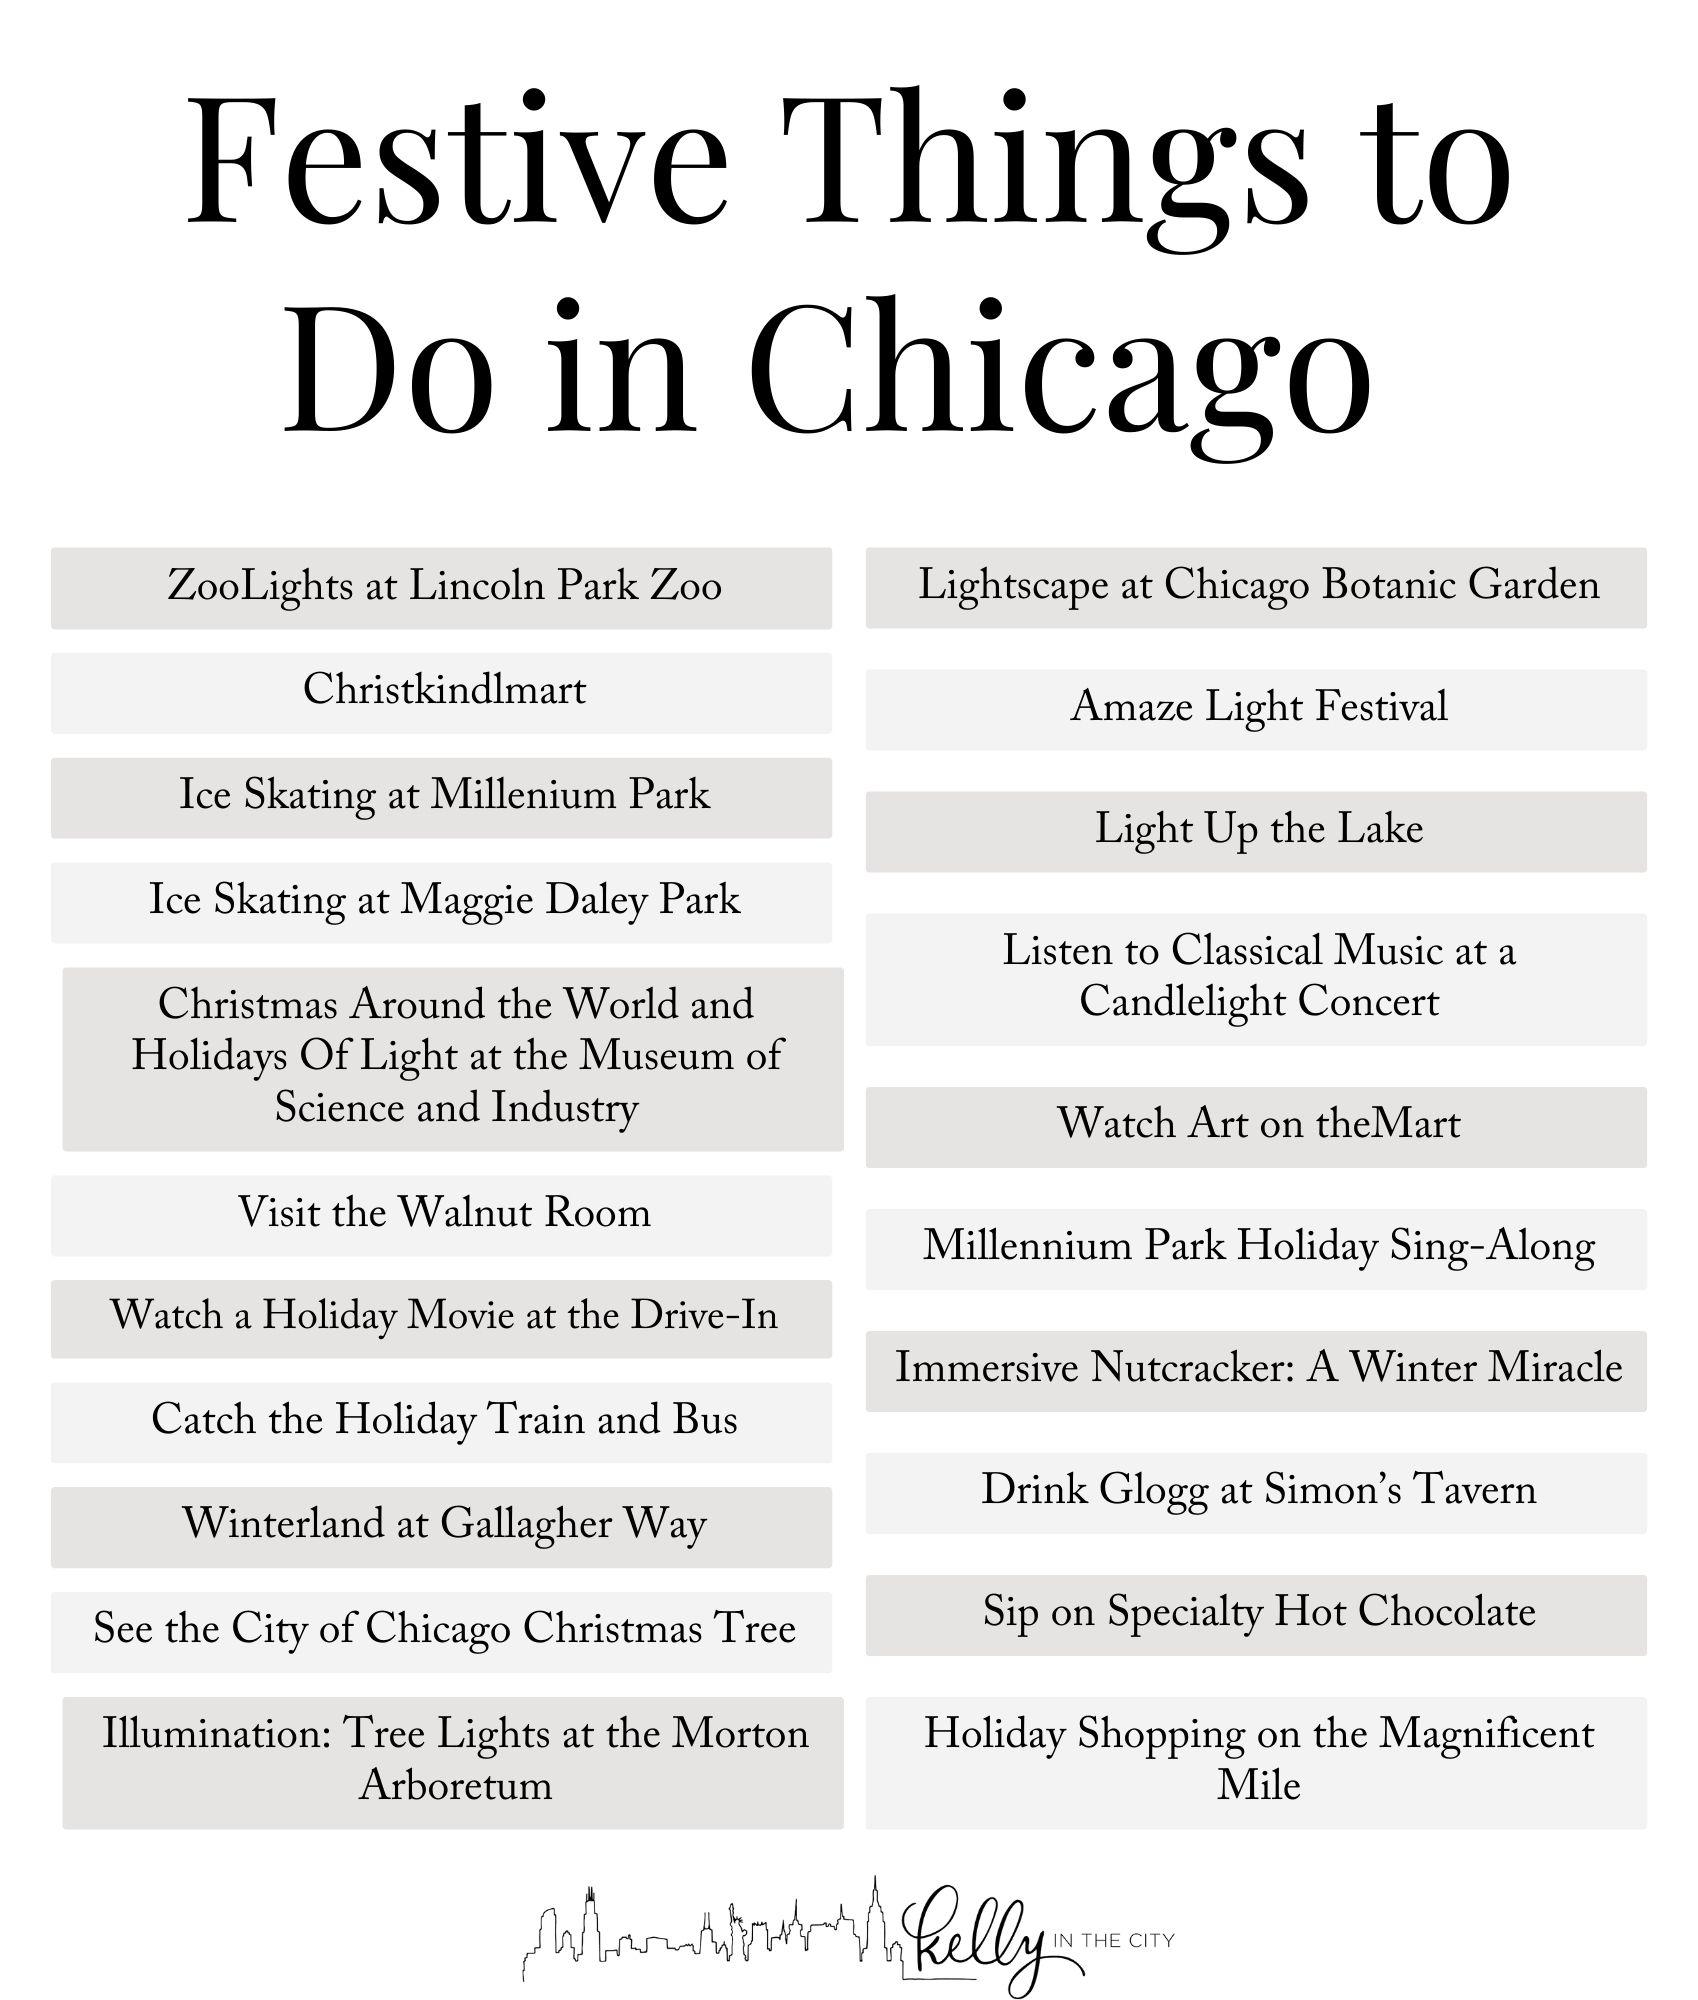 Festive Things to do in Chicago